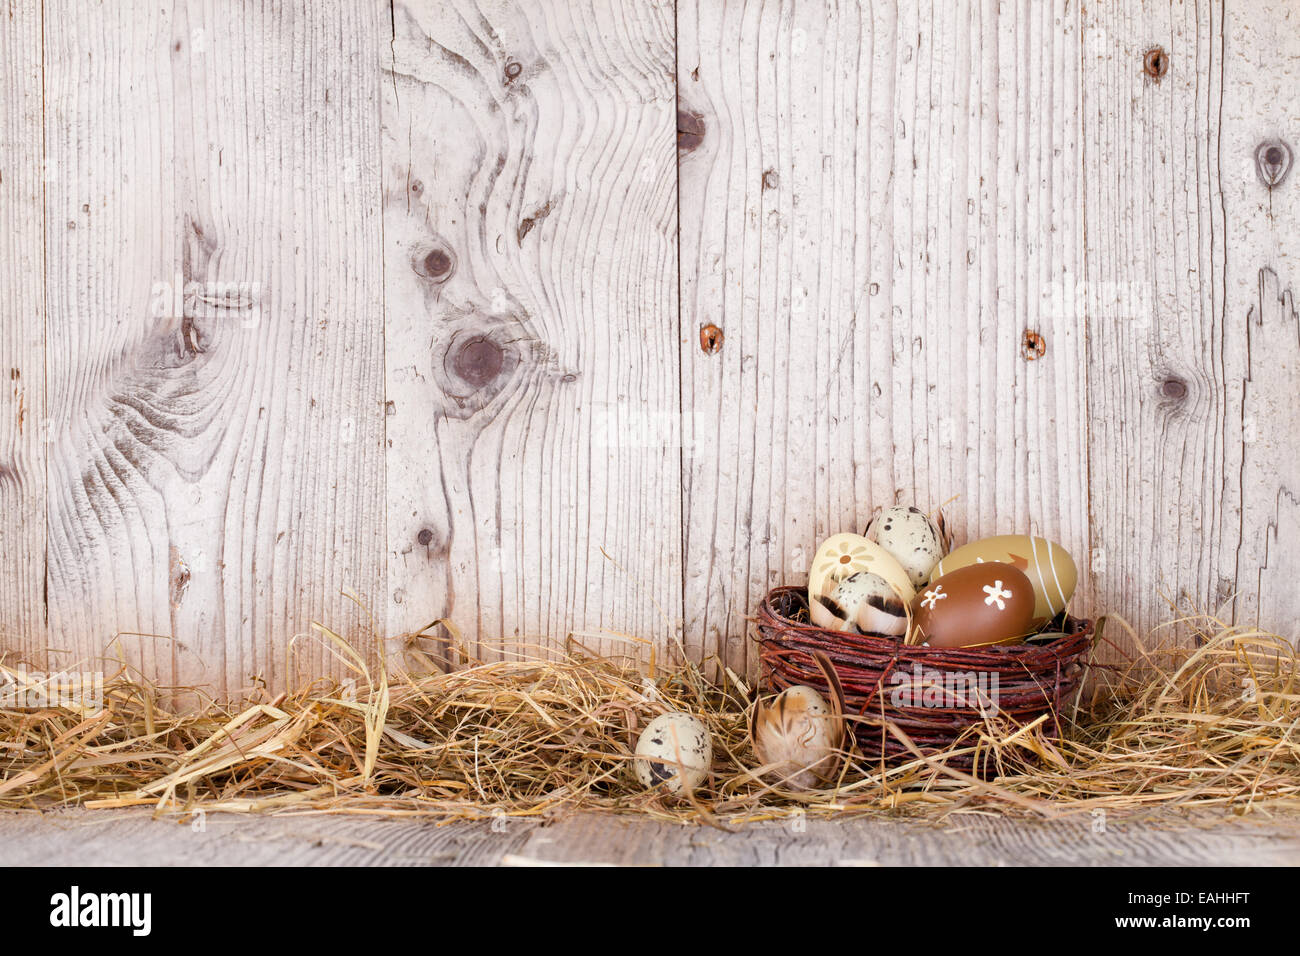 Easter still life with traditional decorative eggs in straw Stock Photo